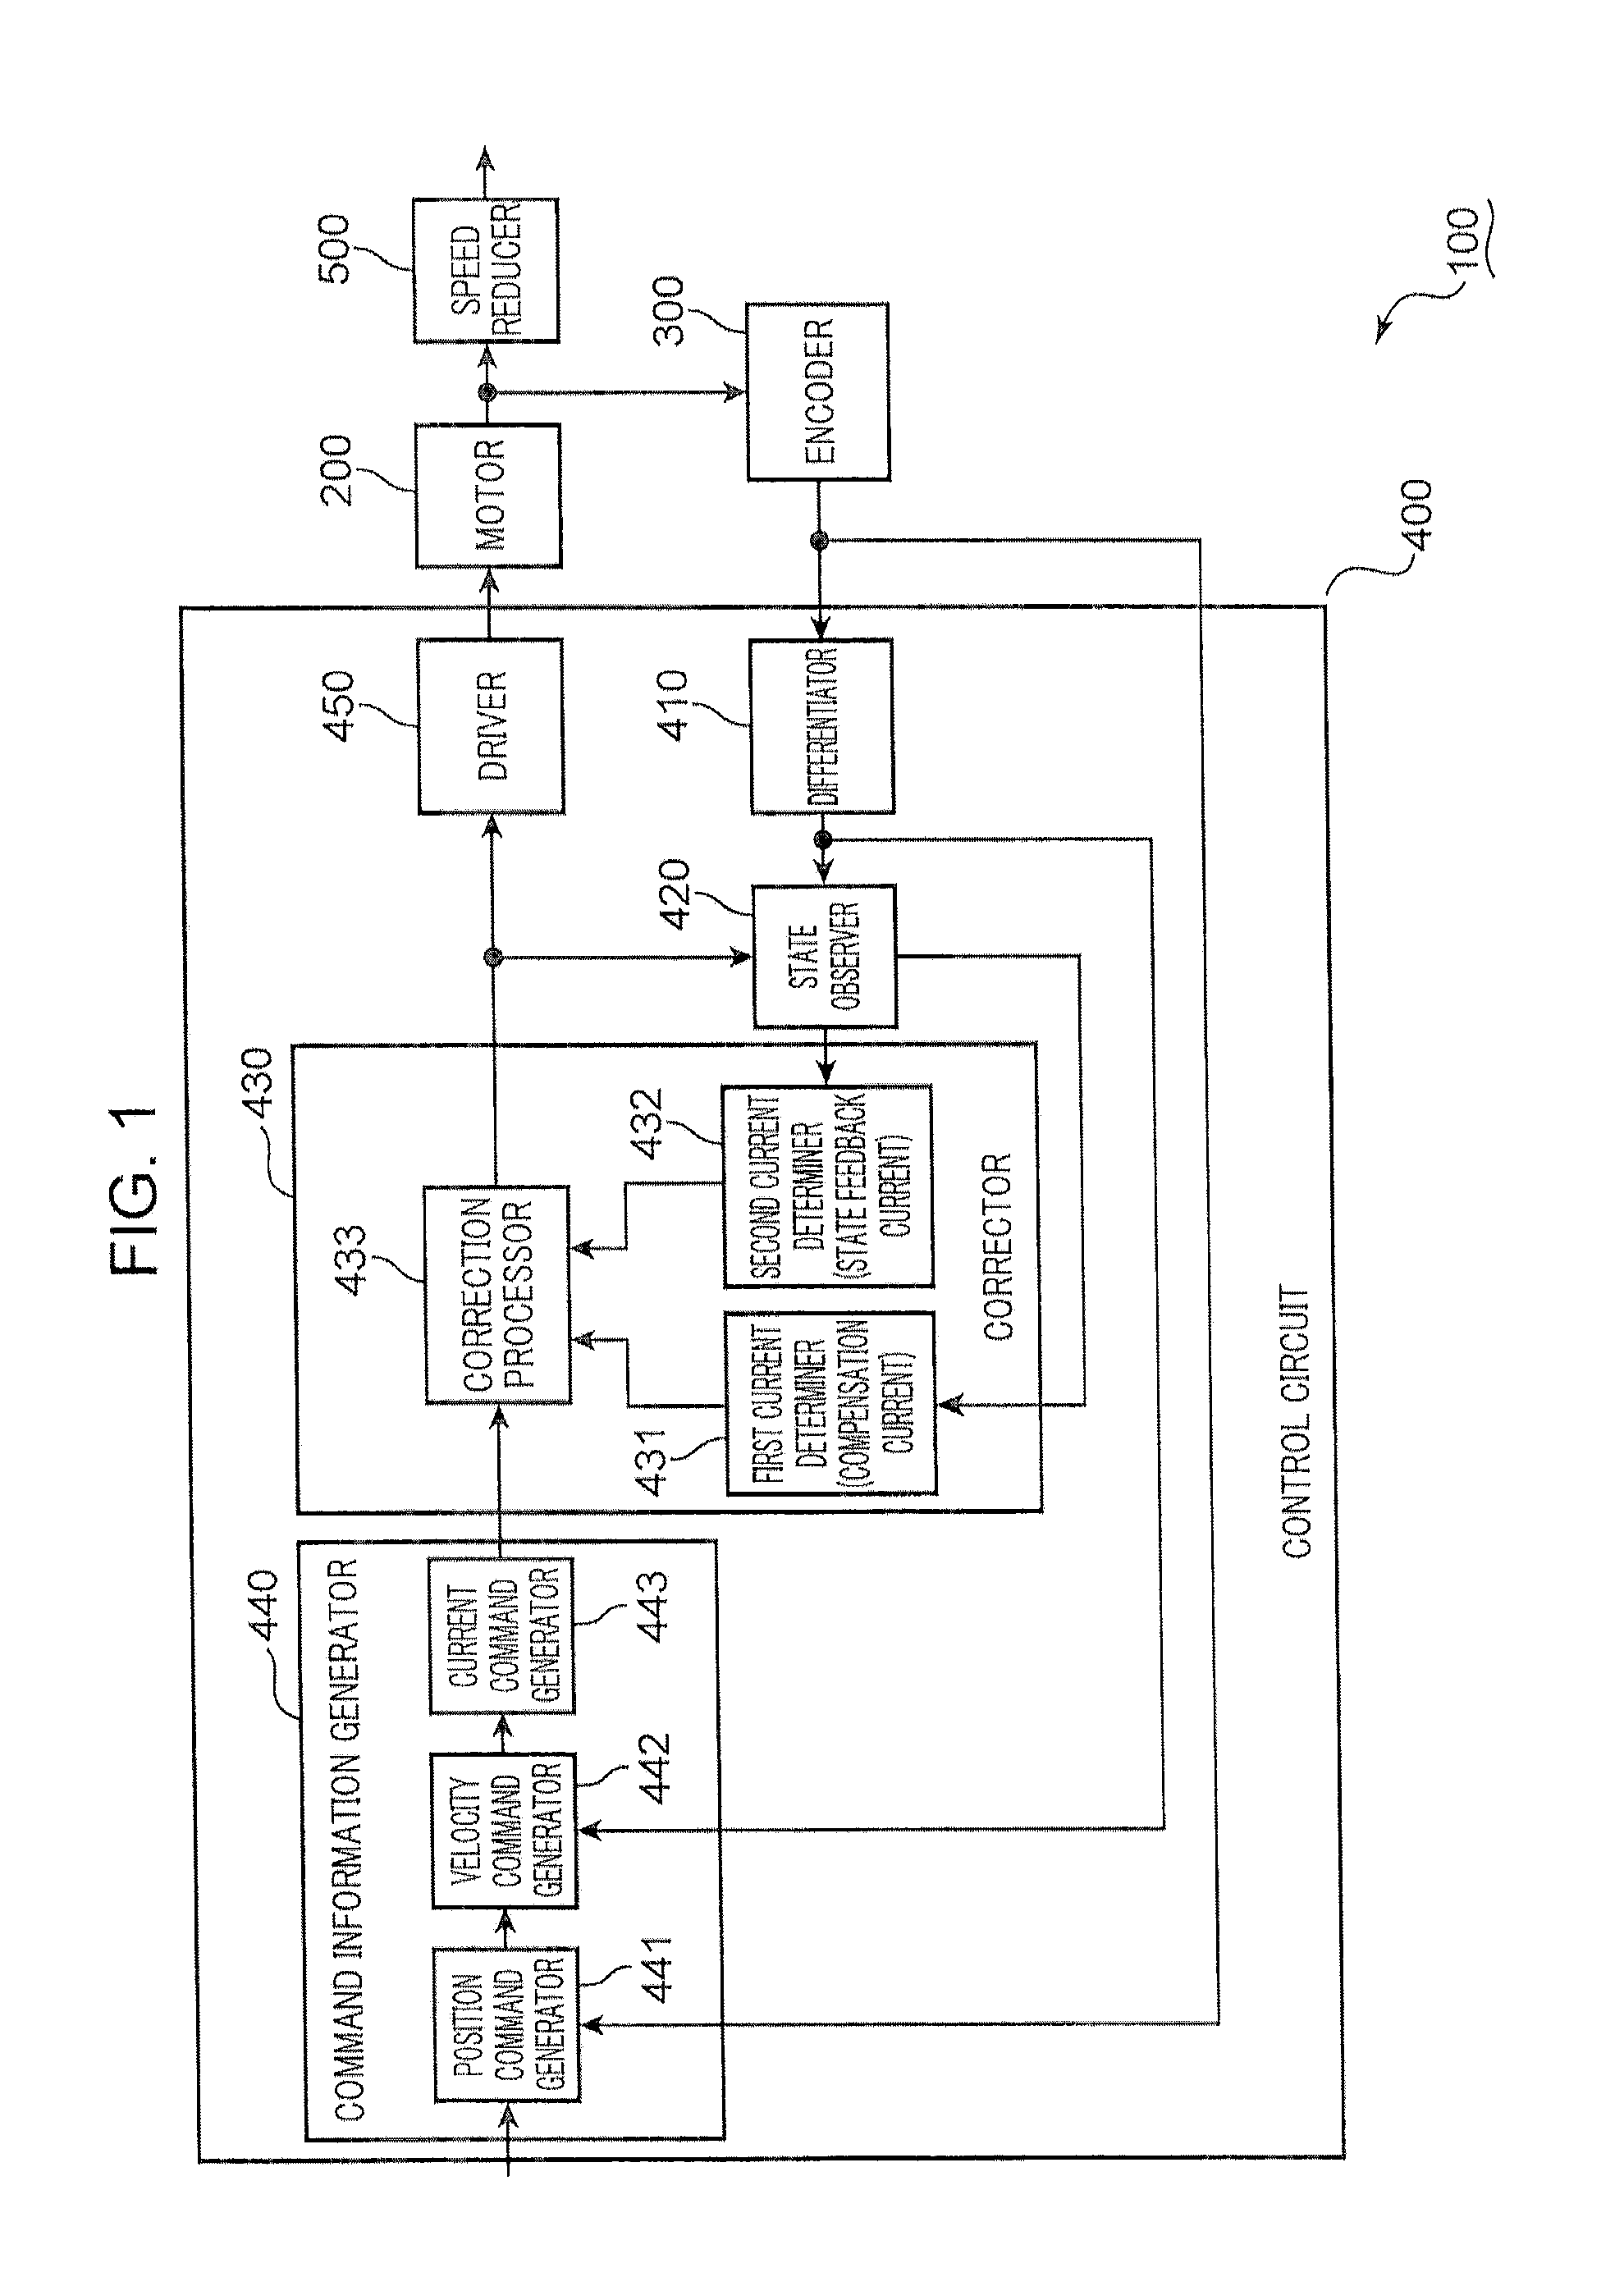 Control device and speed reducer system